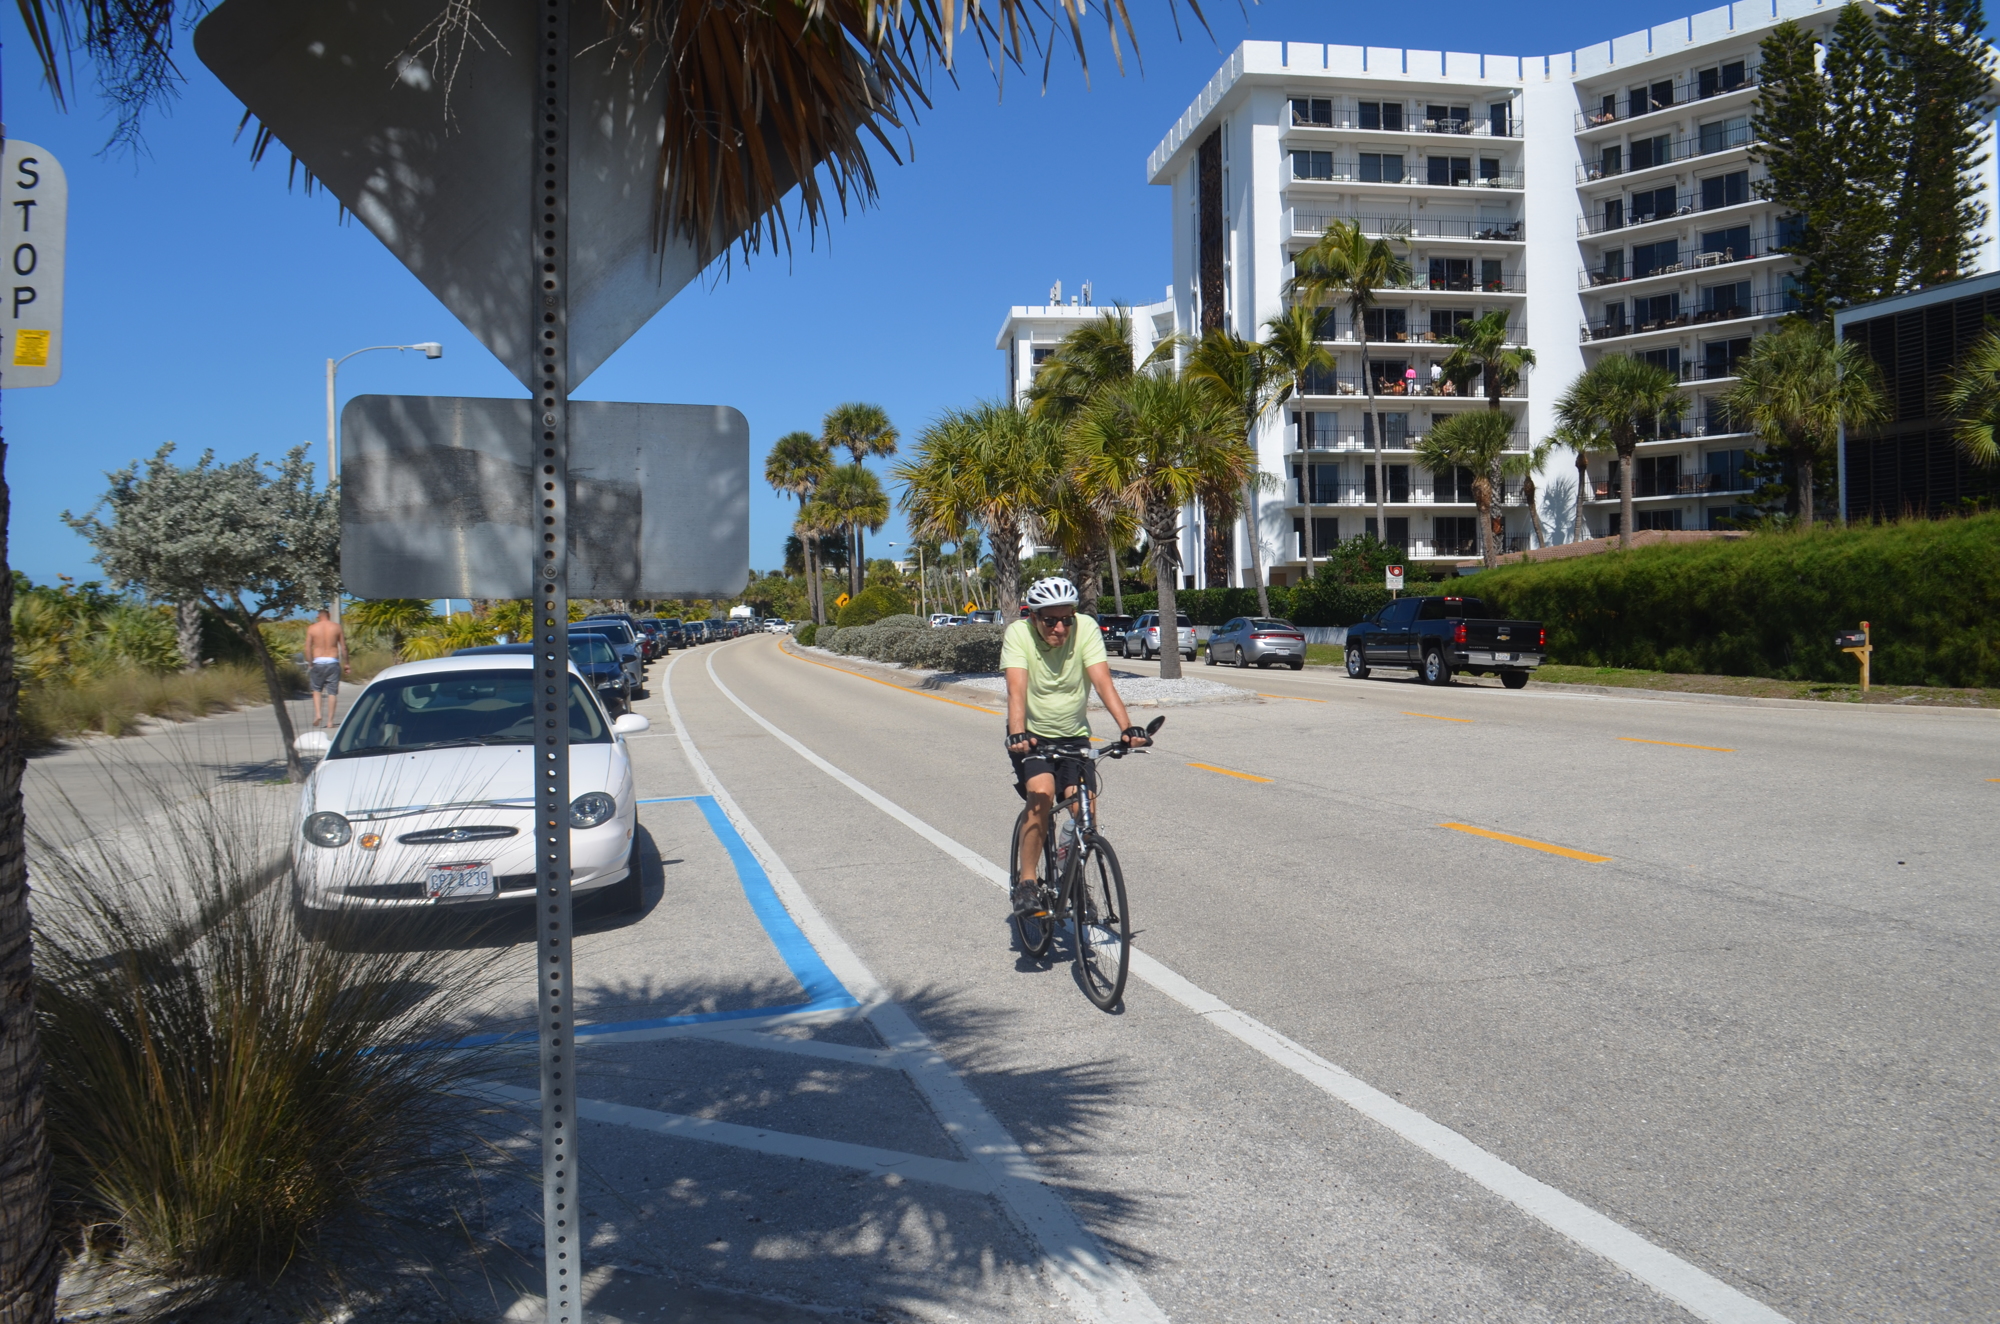 The city hopes a series of trails from the mainland to Lido Key will allow visitors to get around on bikes rather than in cars, if they desire.